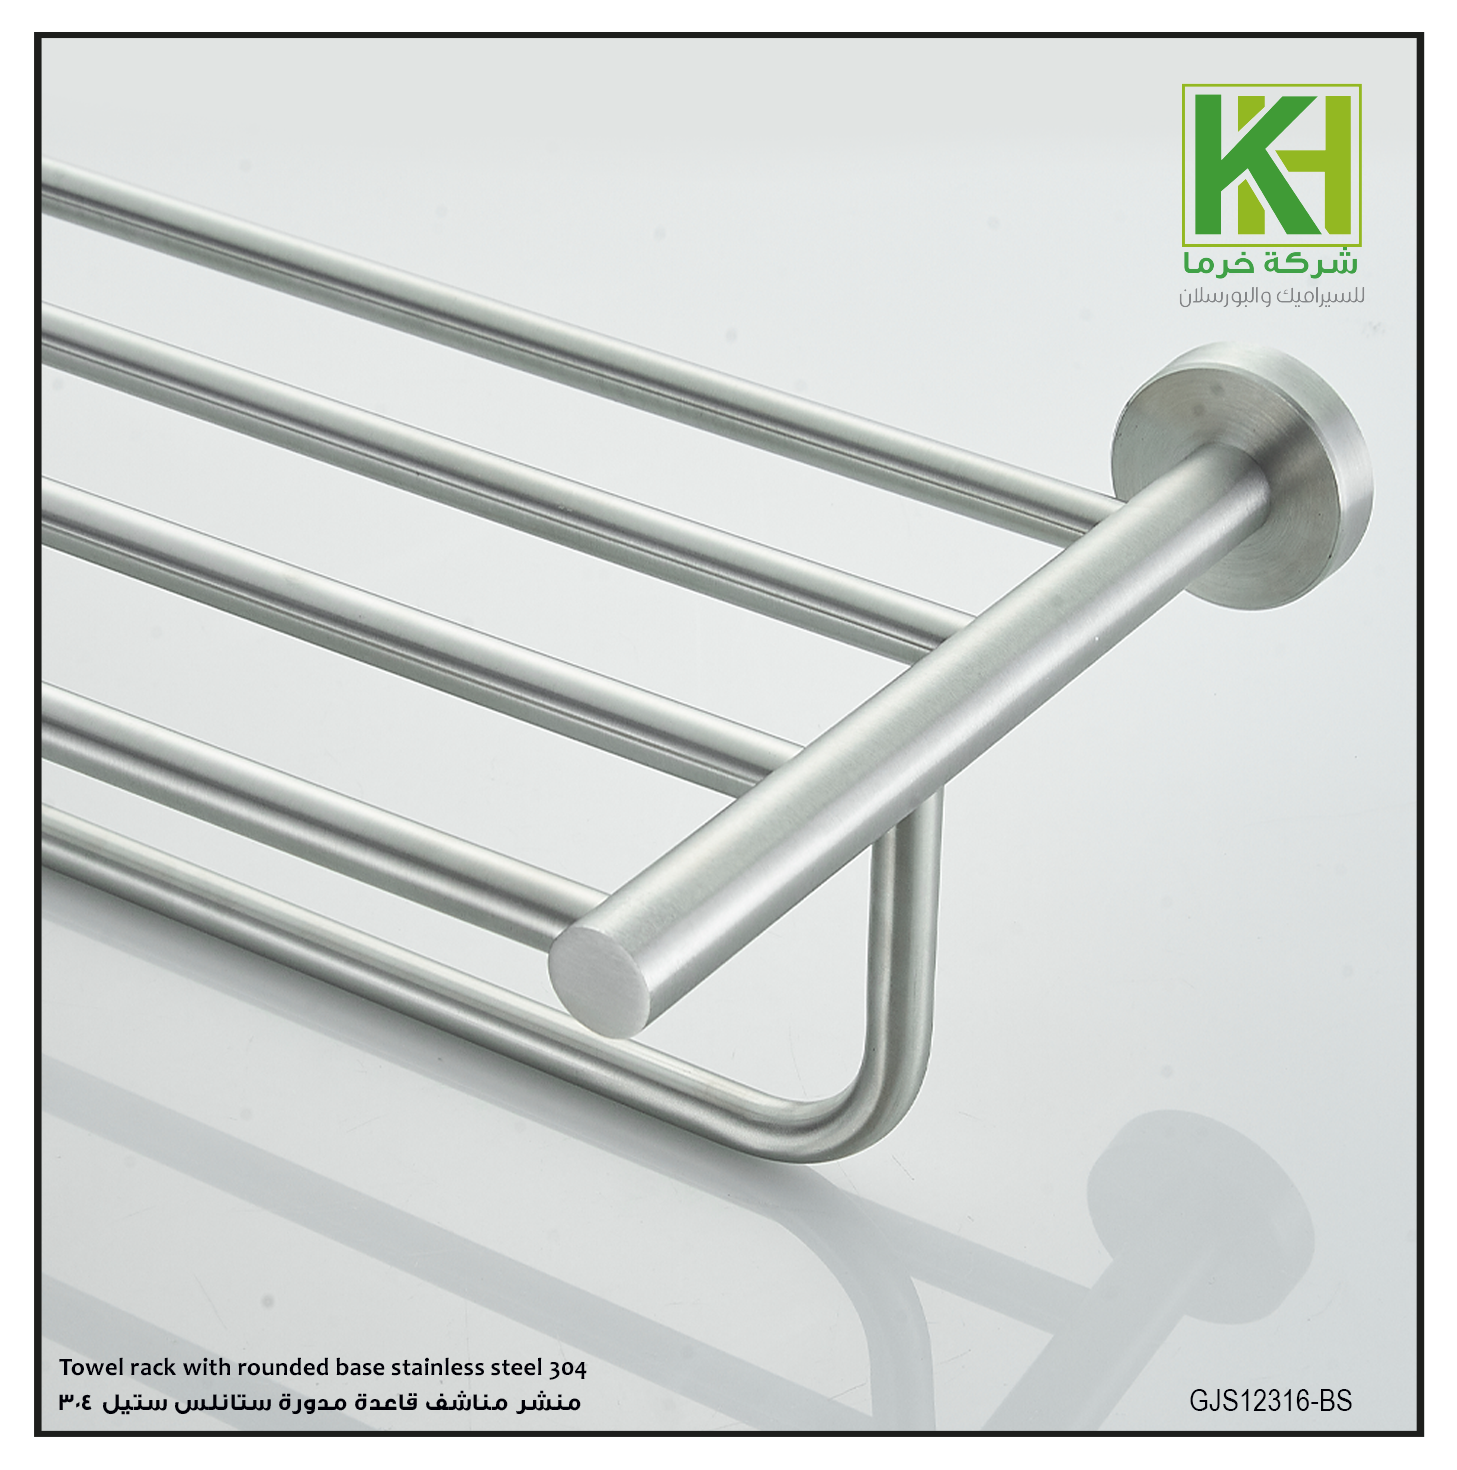 Picture of Towel rack with rounded base stainless steel 304 